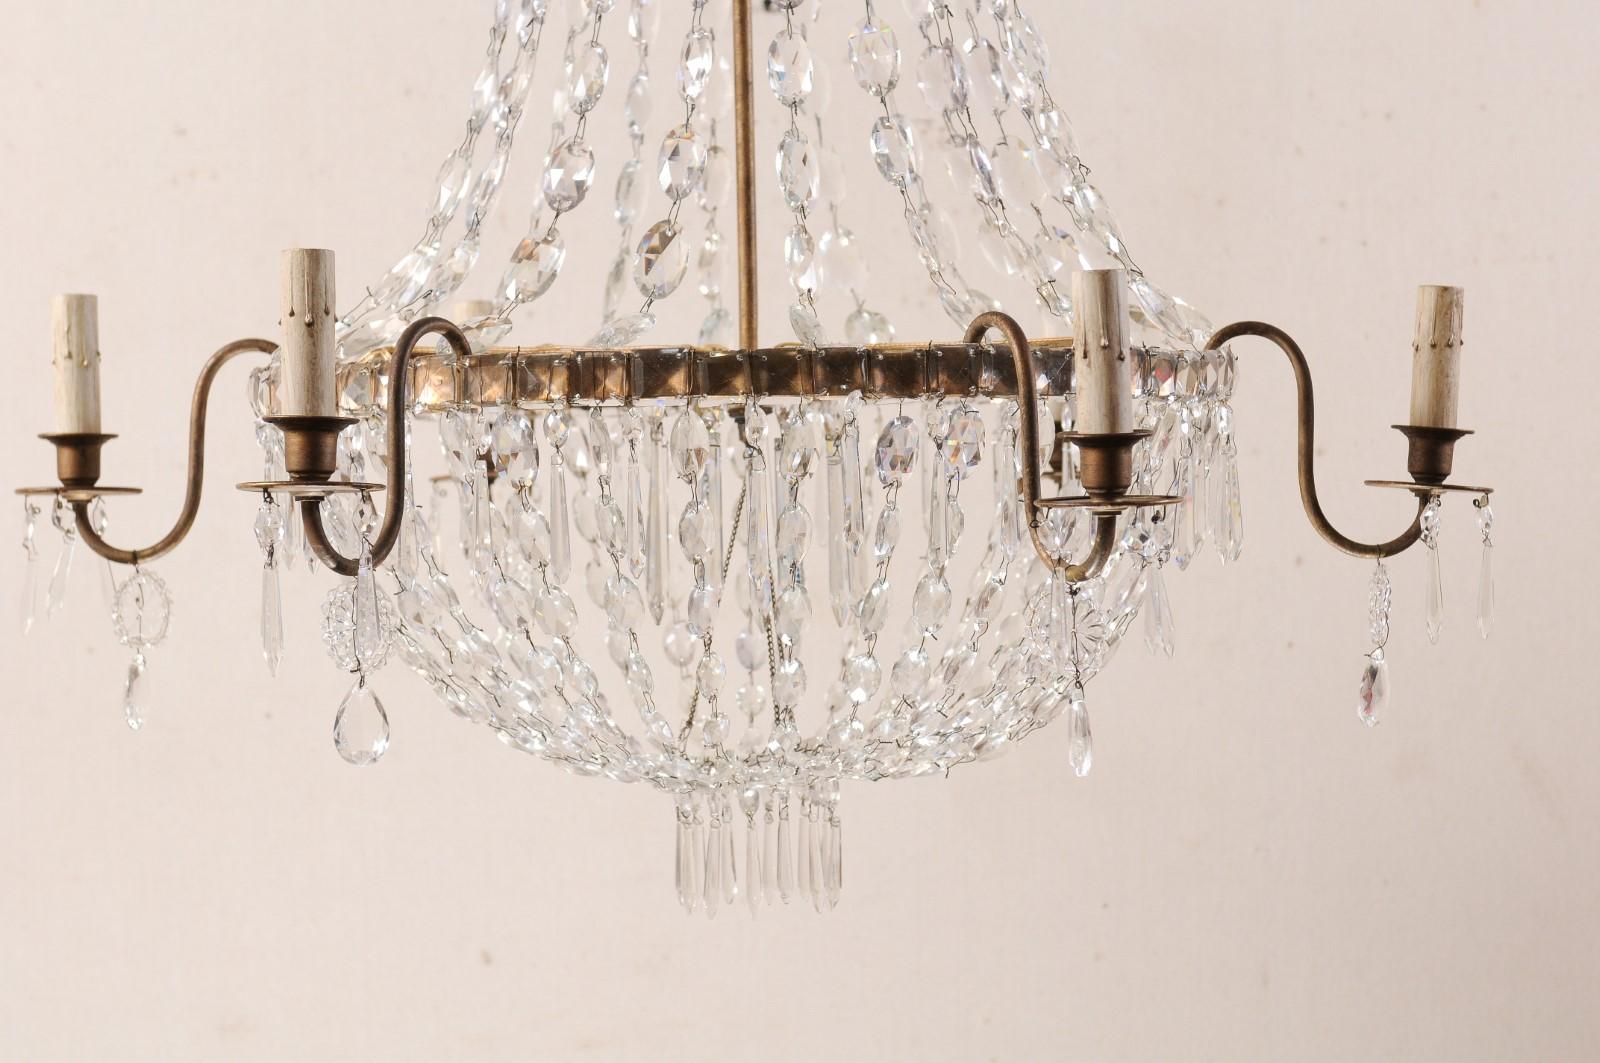 Pair of French Vintage Empire Style Six-Light Crystal Basket-Shaped Chandeliers For Sale 4